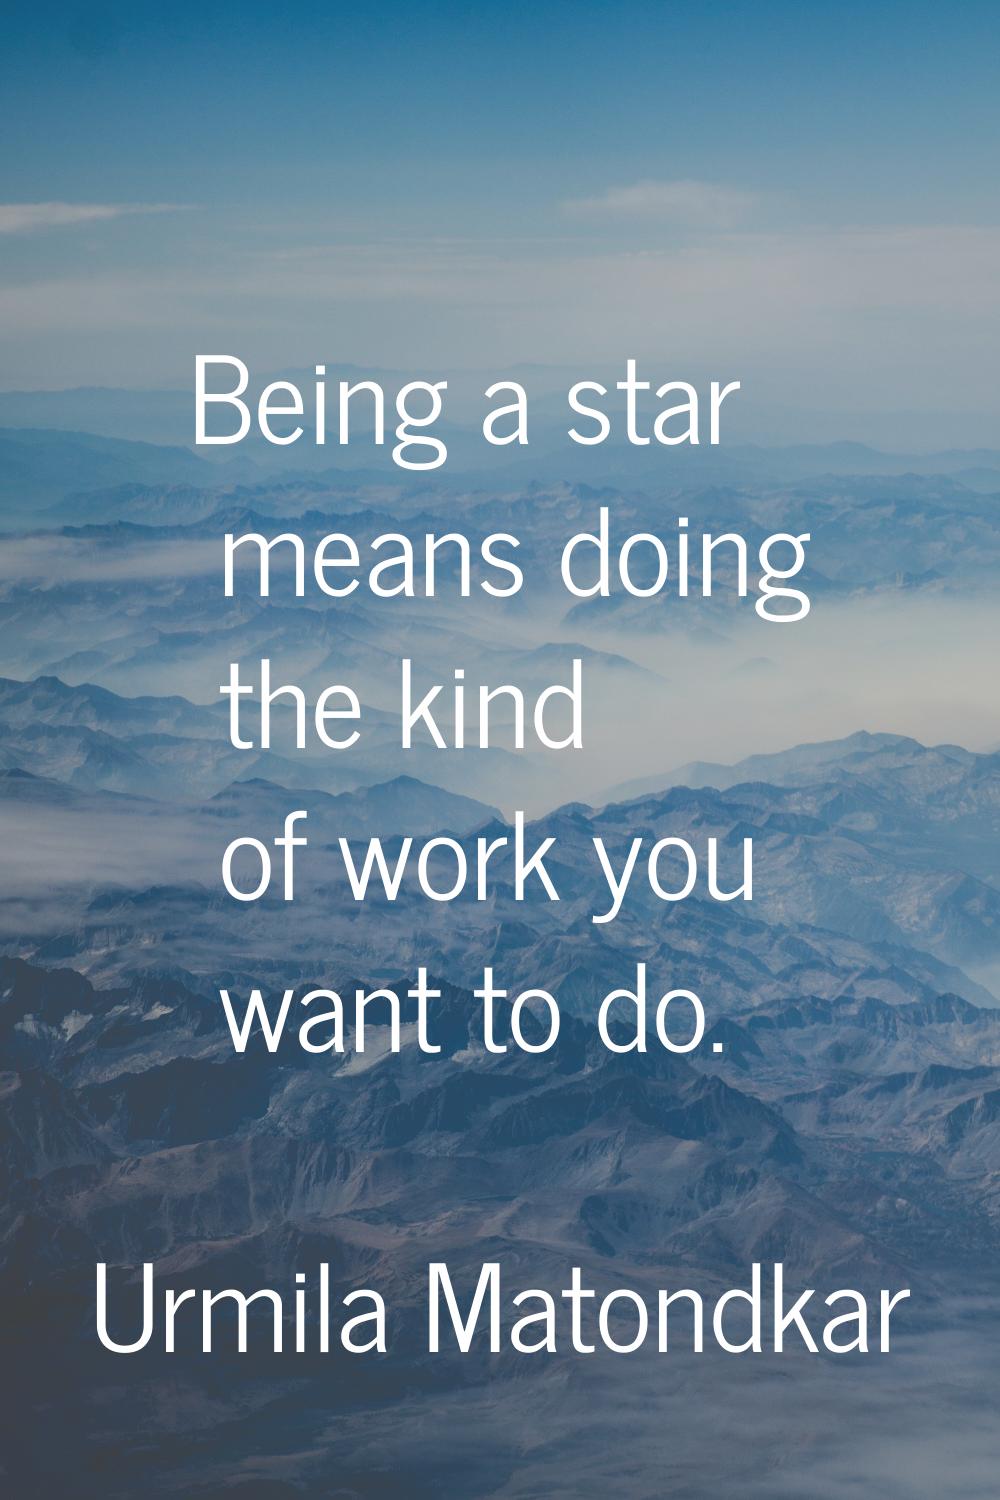 Being a star means doing the kind of work you want to do.